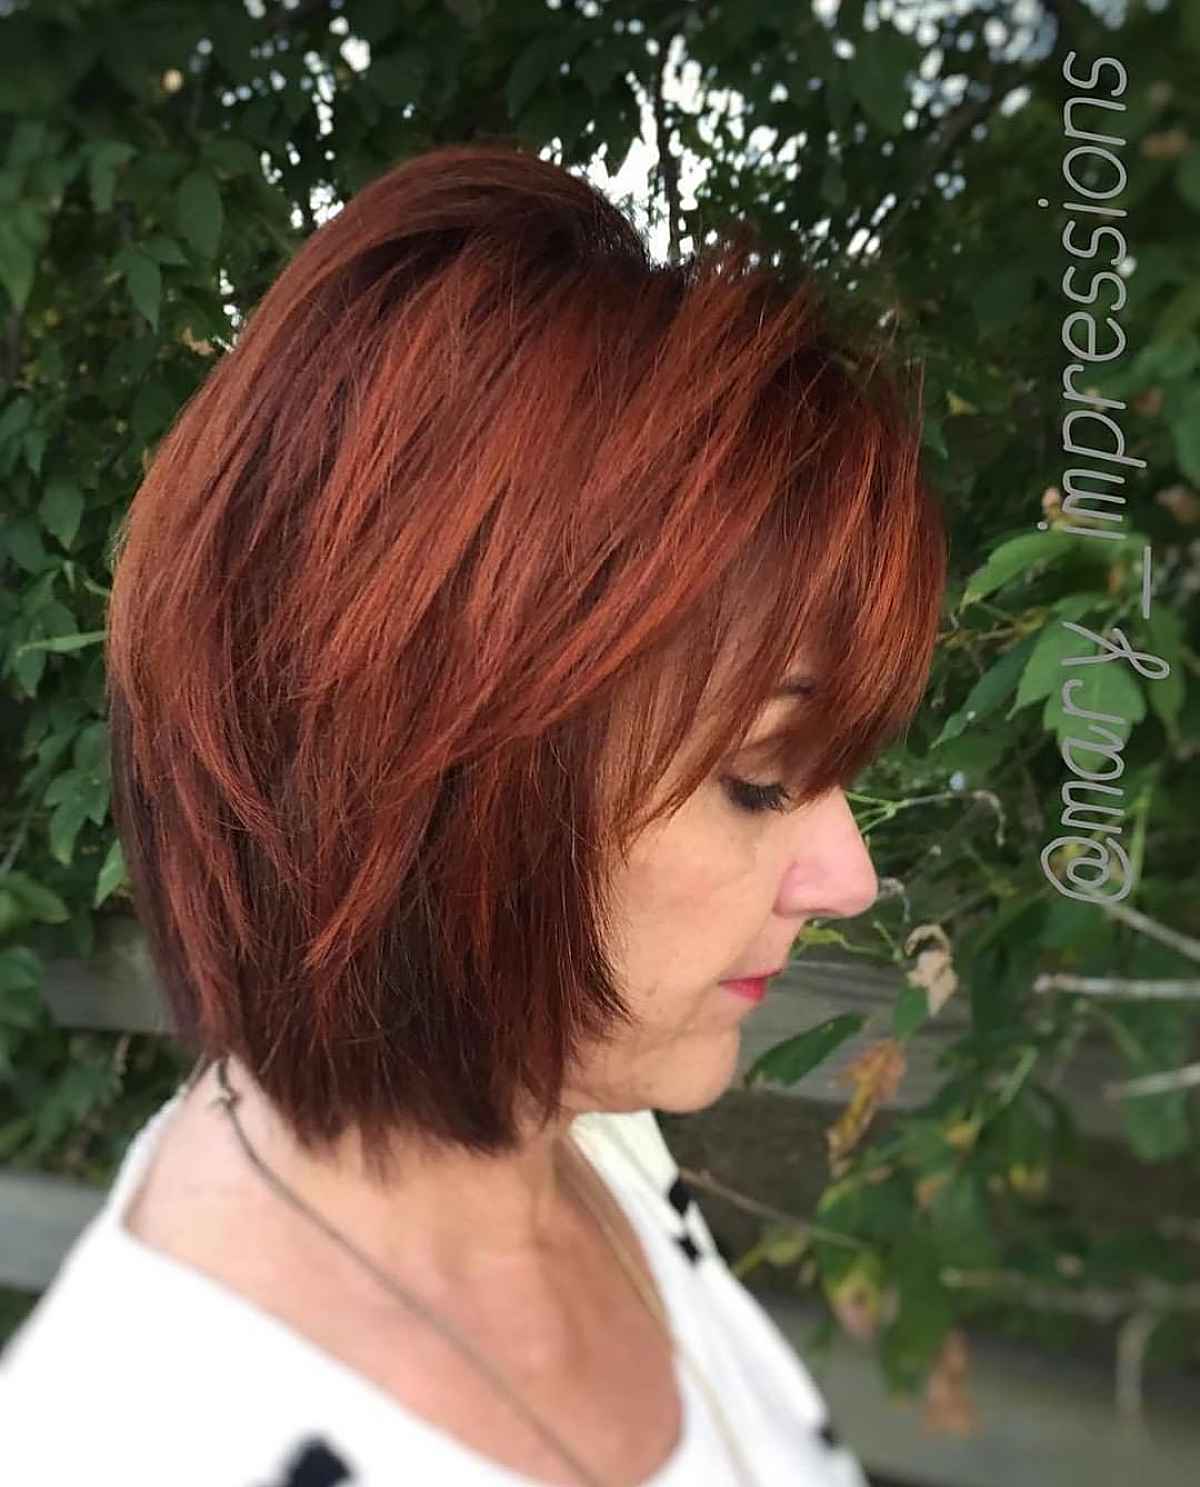 Cinnamon Red Layered Cut with Long Bangs